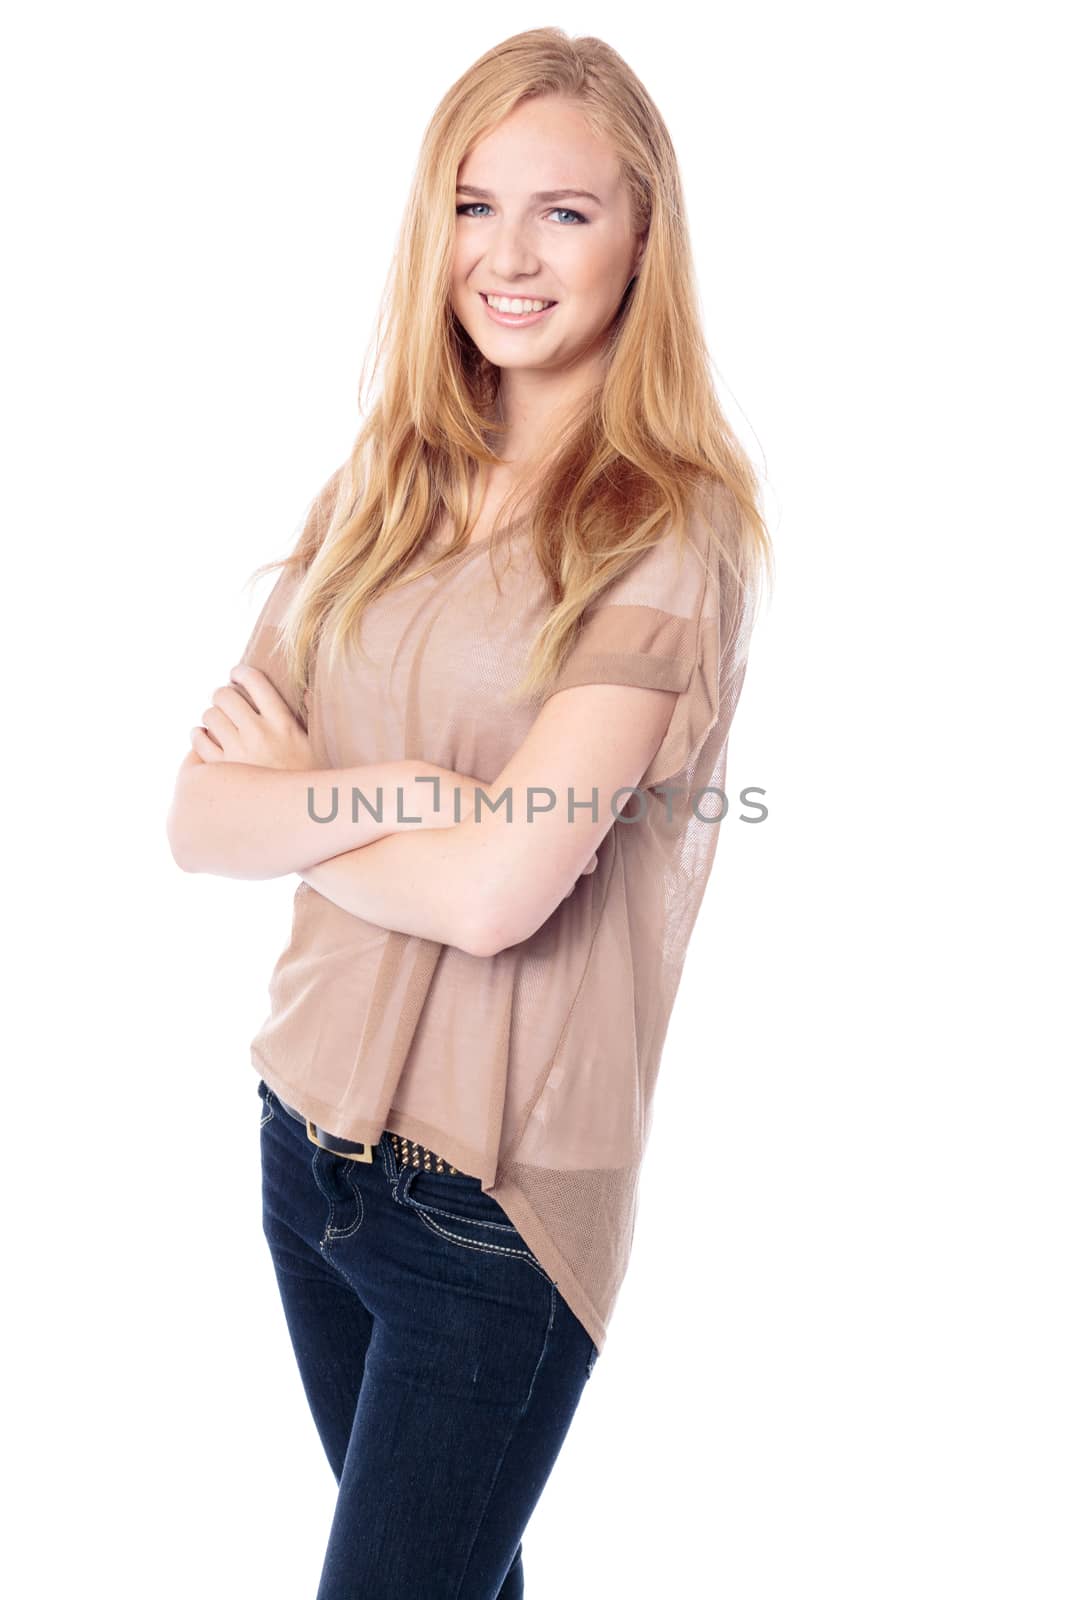 Smiling relaxed casual woman with long straight blond hair standing with her arms folded, three quarter portrait on white